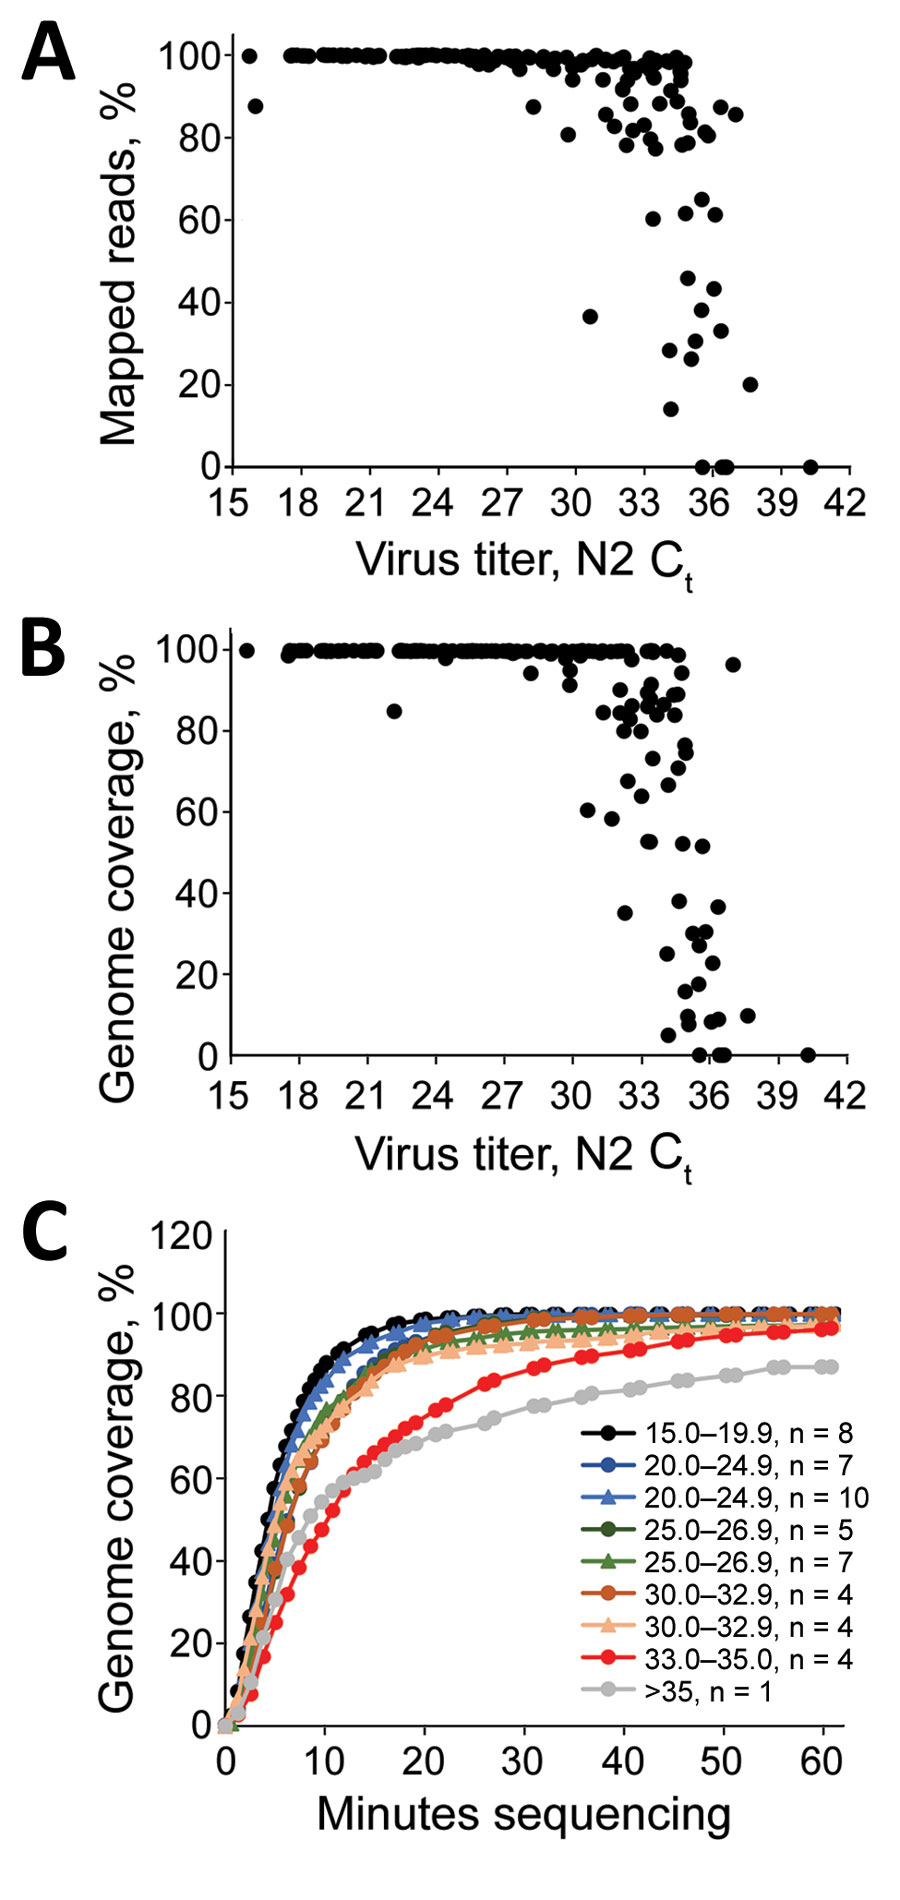 Sequencing of severe acute respiratory syndrome coronavirus 2 clinical samples. A, B) Percentage mapped (A) and percentage genome coverage (B) for 167 clinical severe acute respiratory syndrome coronavirus 2 samples amplified by using a multiplex PCR strategy and sequenced on the MinION apparatus (https://nanoporetech.com). C) Time-lapse of 20× genome coverage obtained for clinical specimens at the indicated cycle threshold values. Data points indicate average coverage over time for various samp